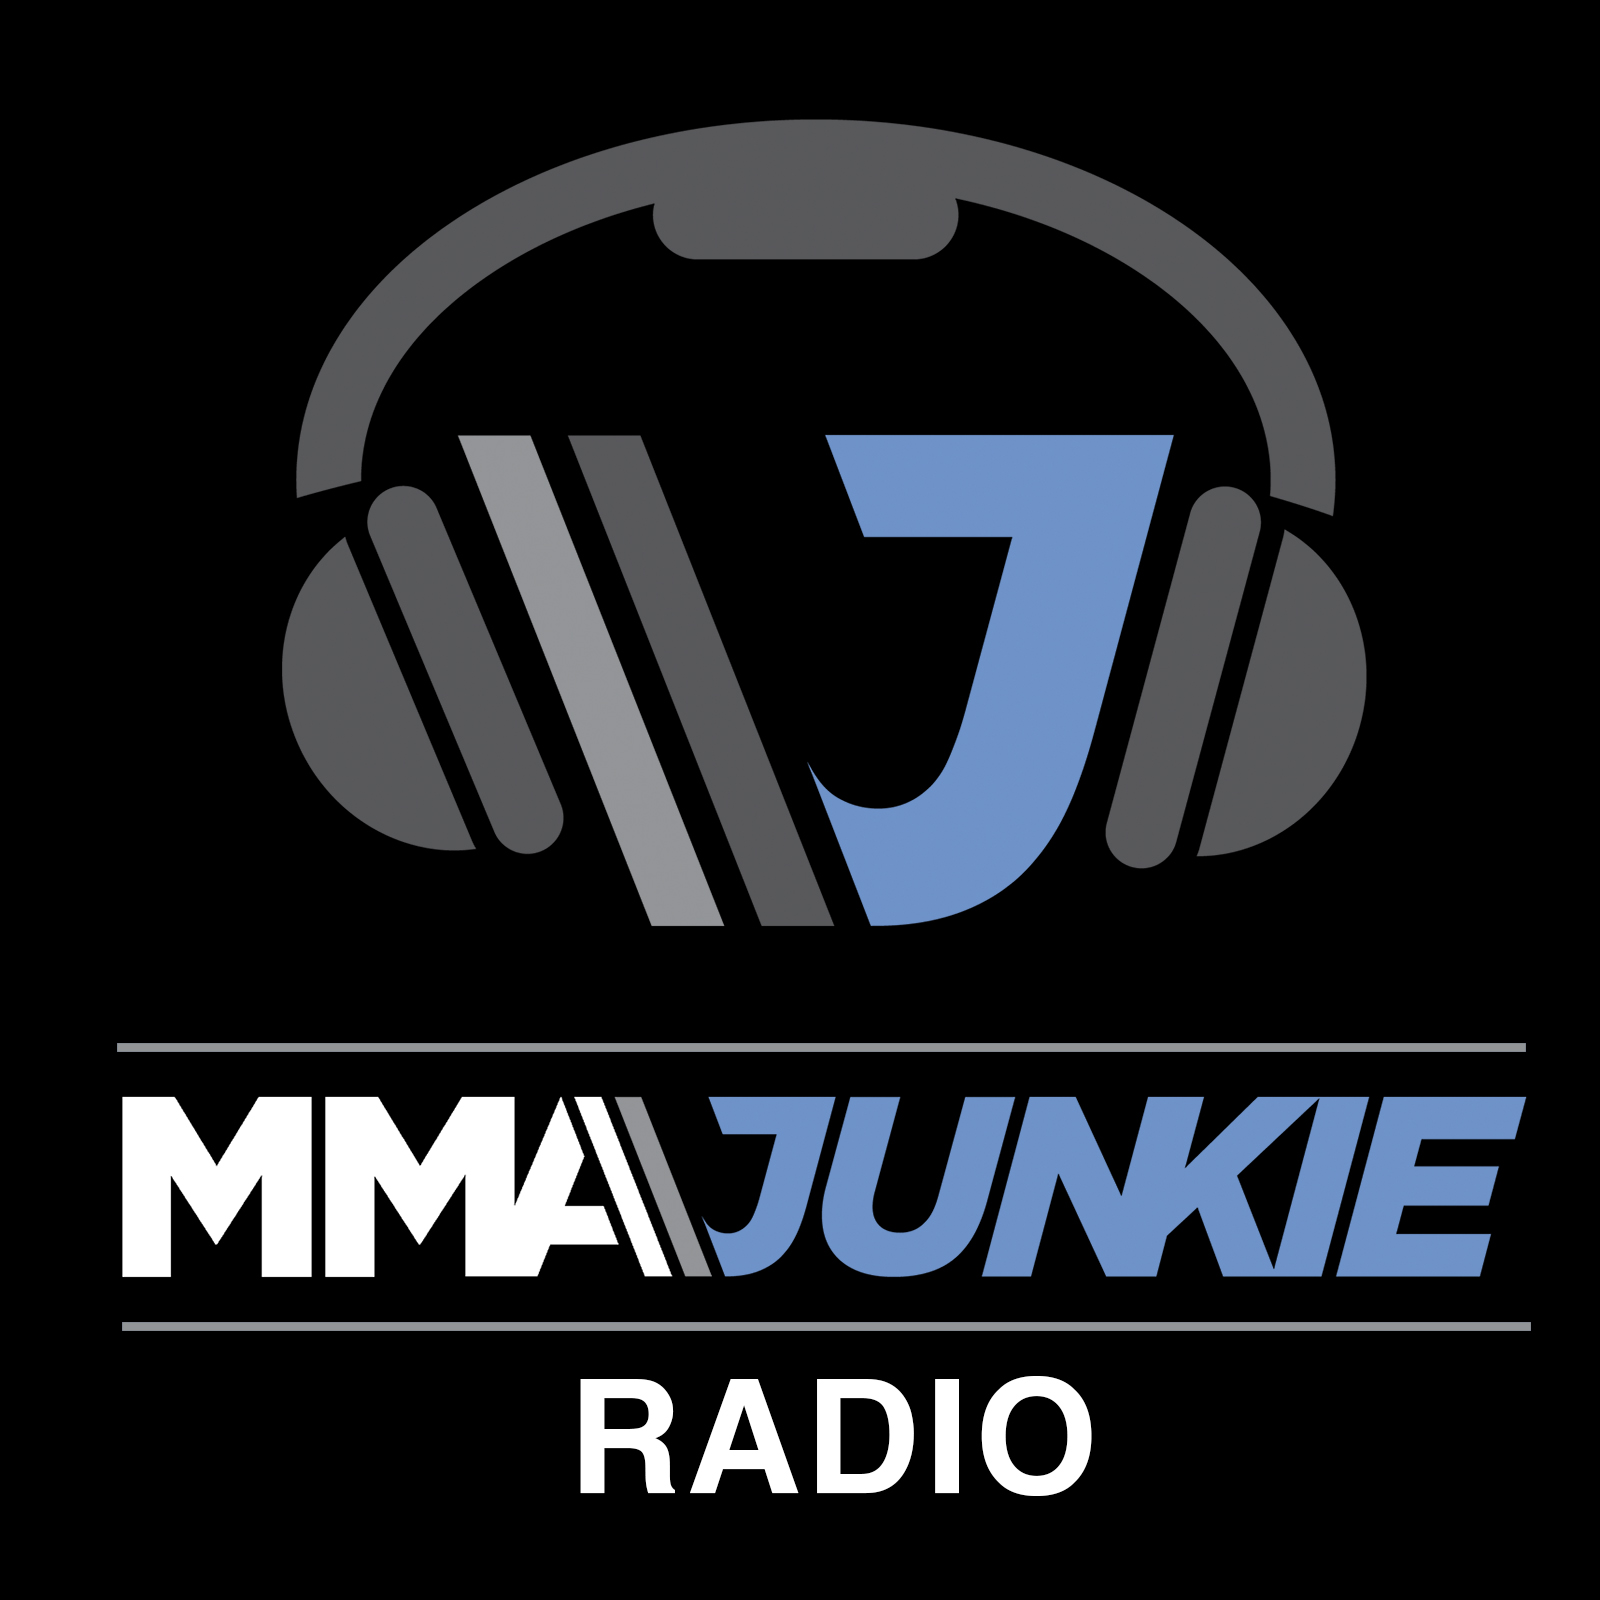 Ep. #3325: Silence from the UFC, Brad Tavares joins the show, more